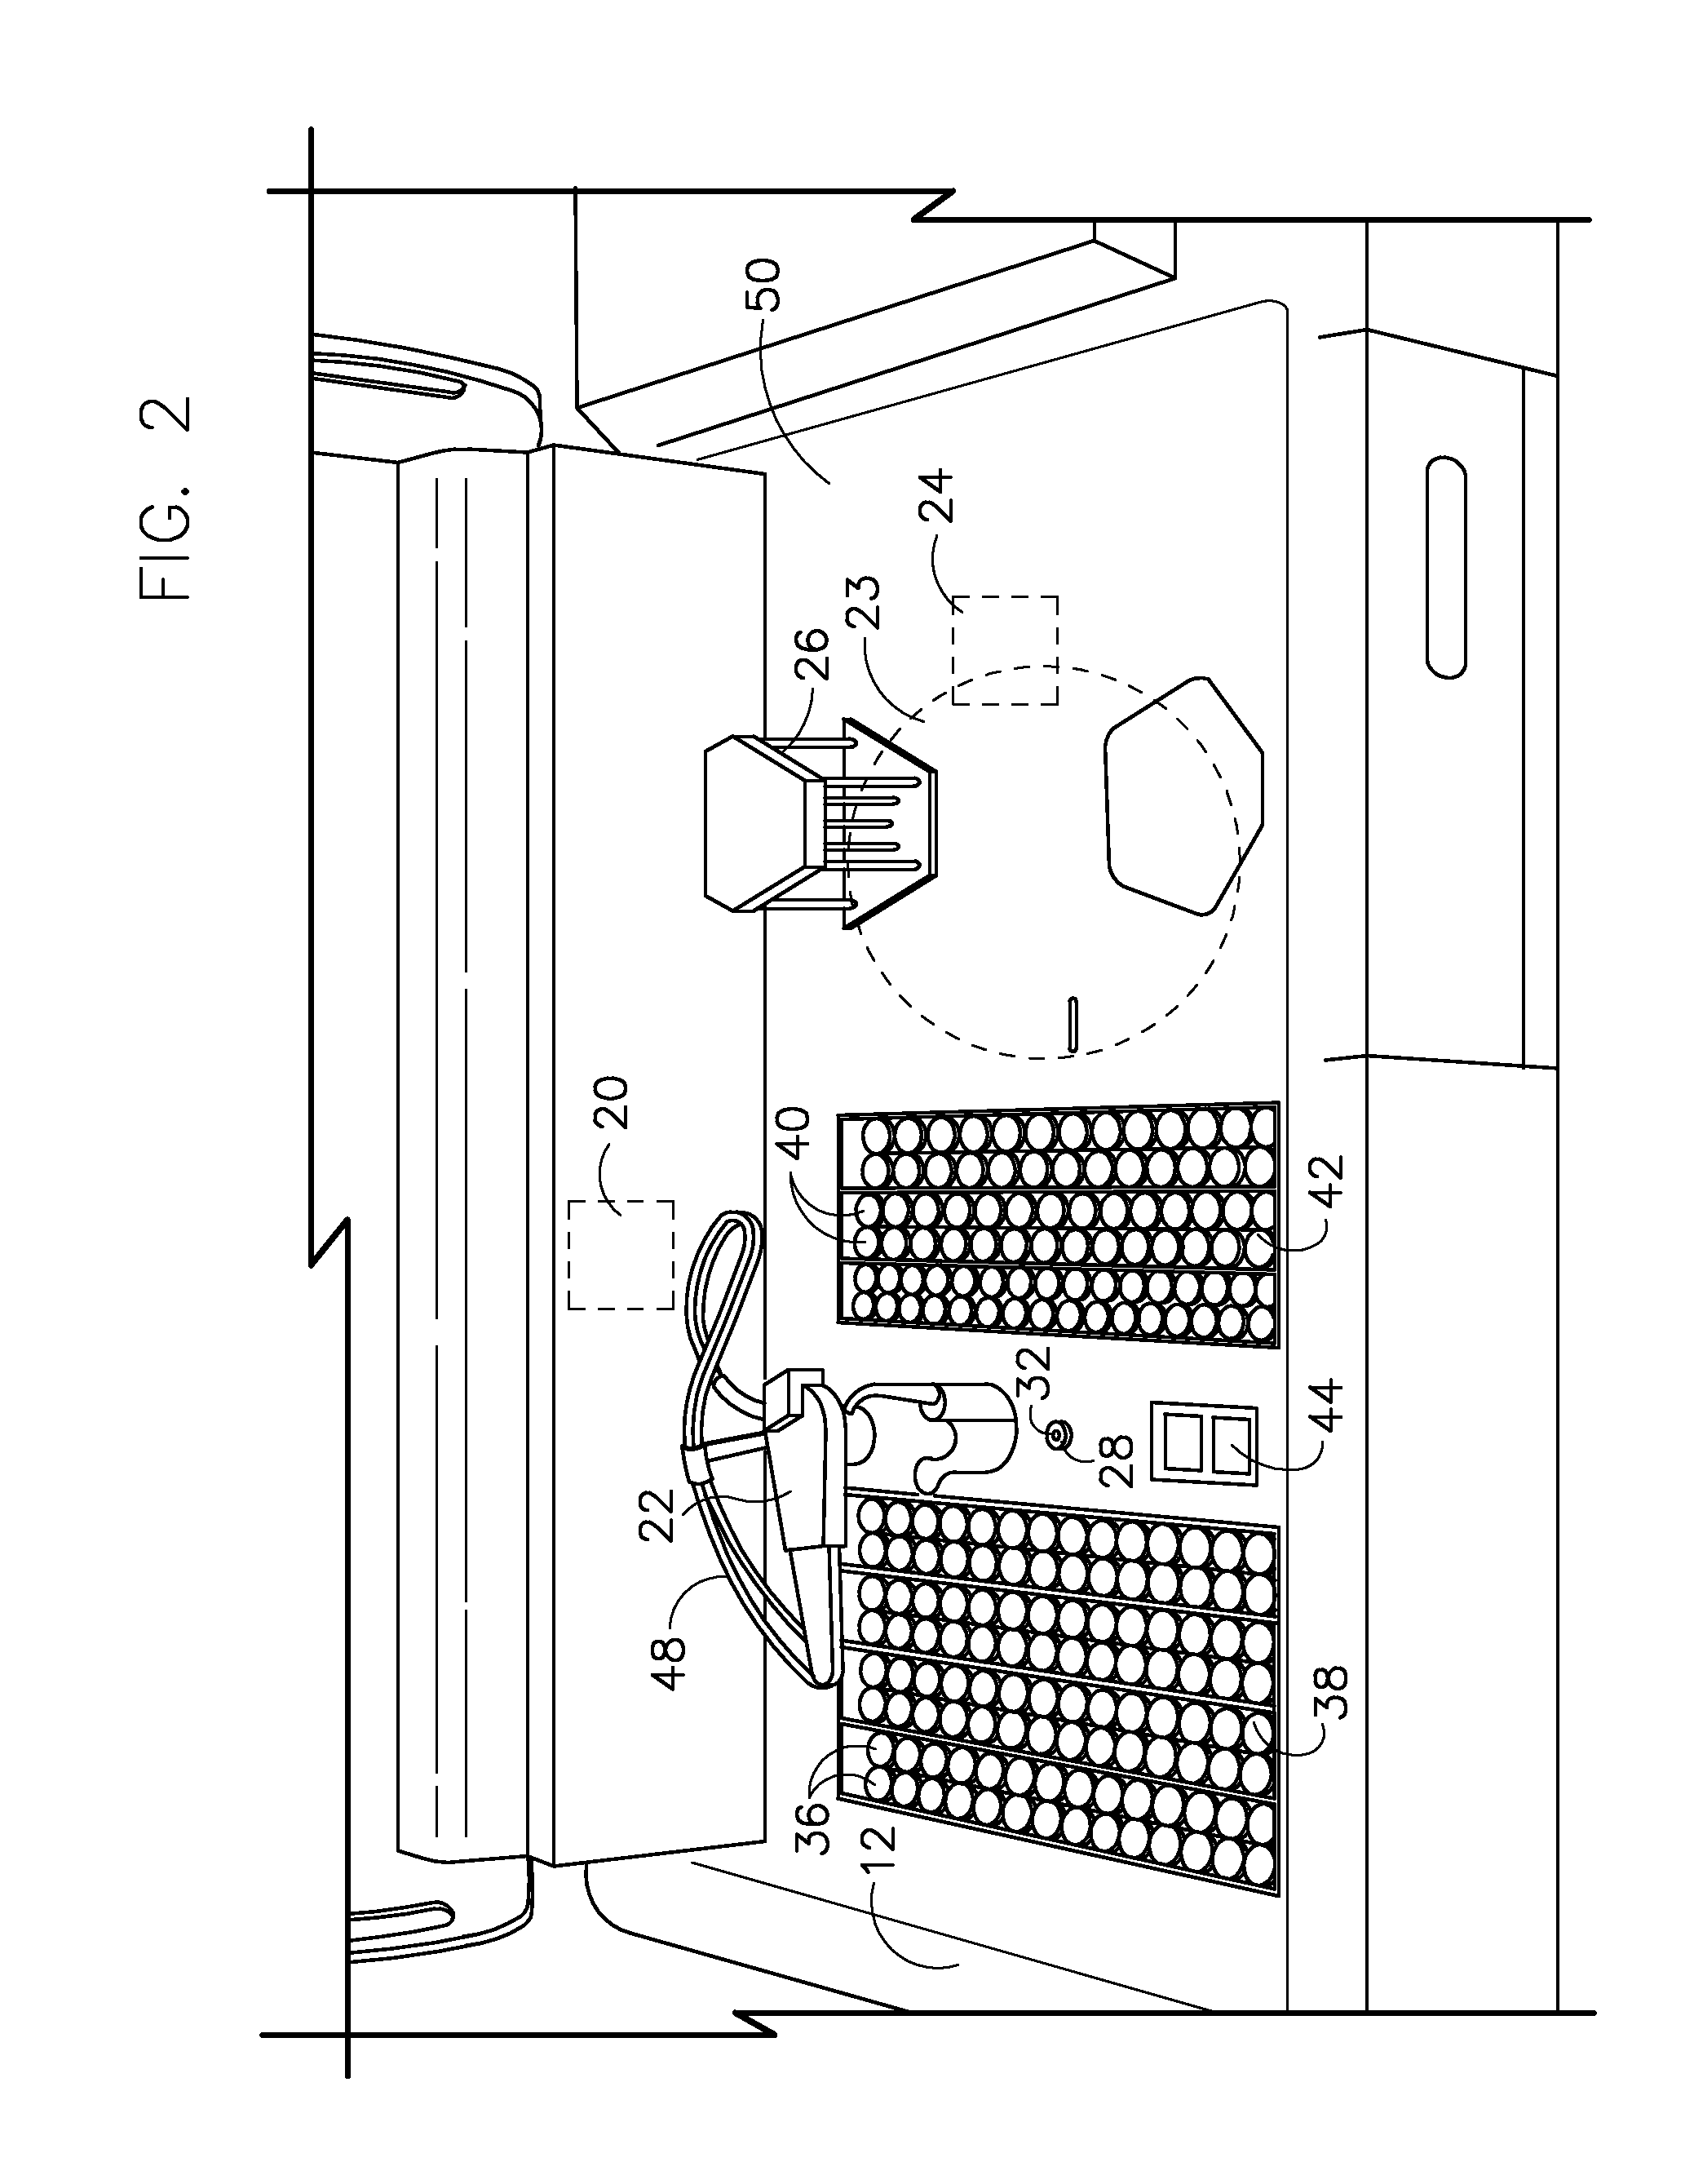 Method and apparatus for sample preparation in an automated discrete fluid sample analyzer